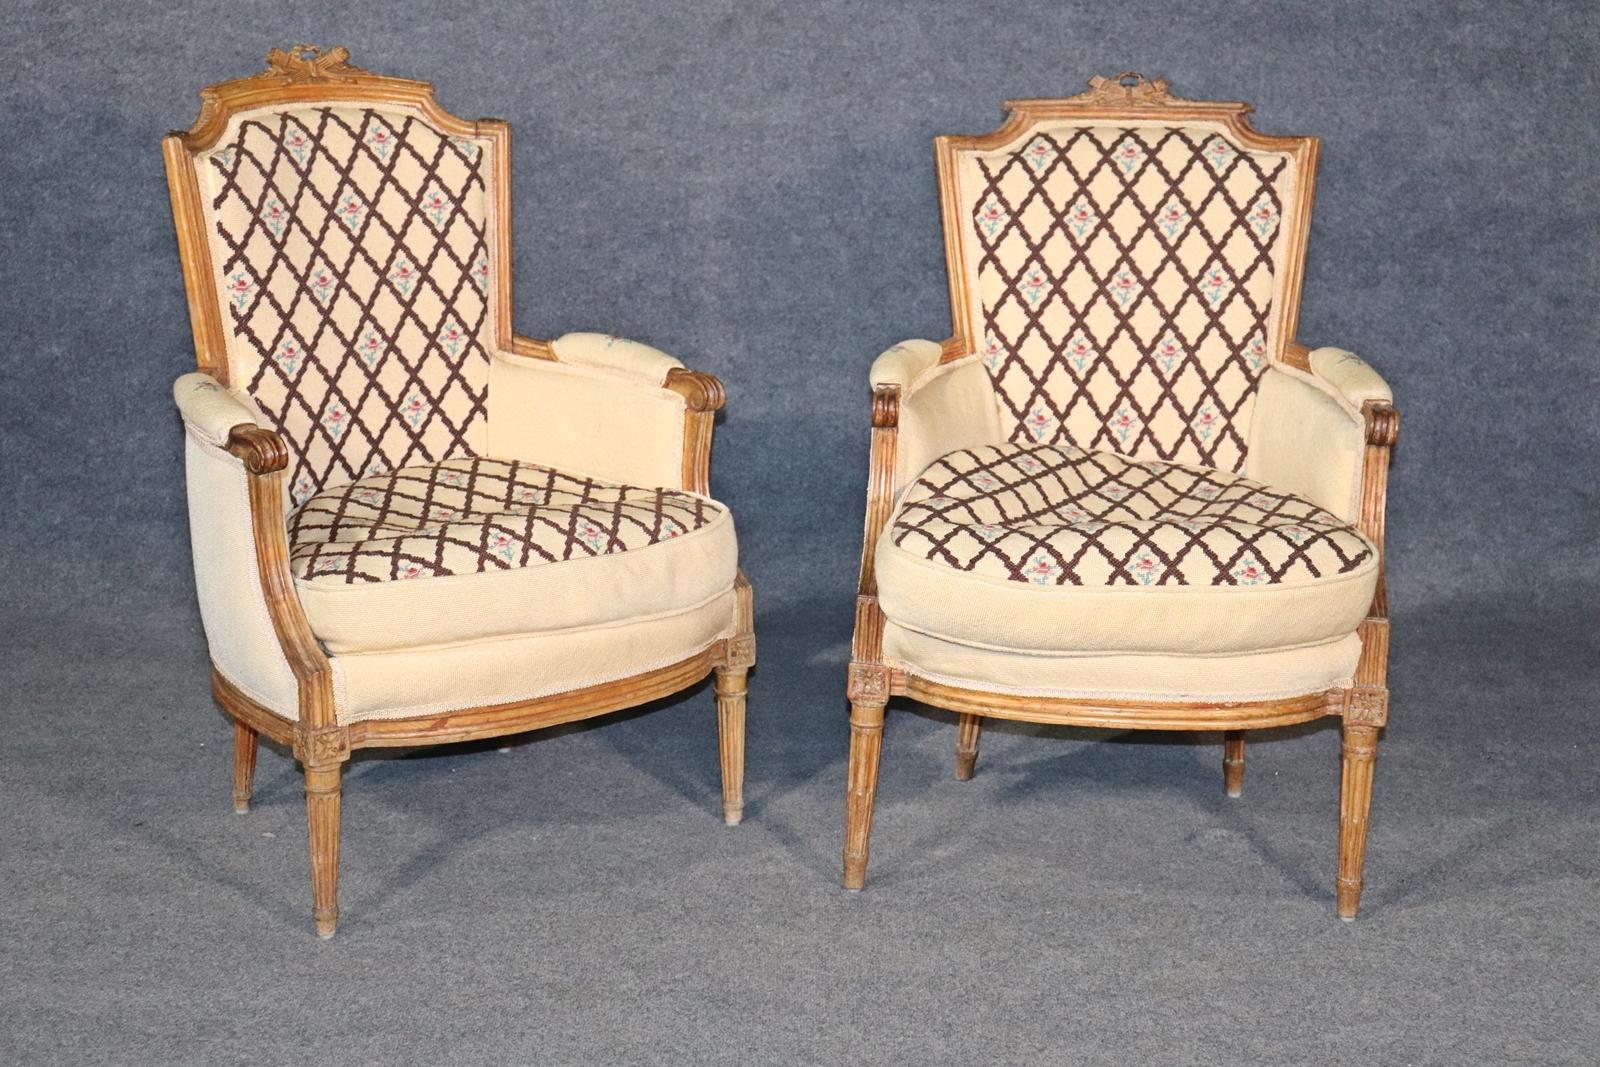 Companion Pair of Nearly Identical French Louis XVI Armchairs, Circa 1900 For Sale 6